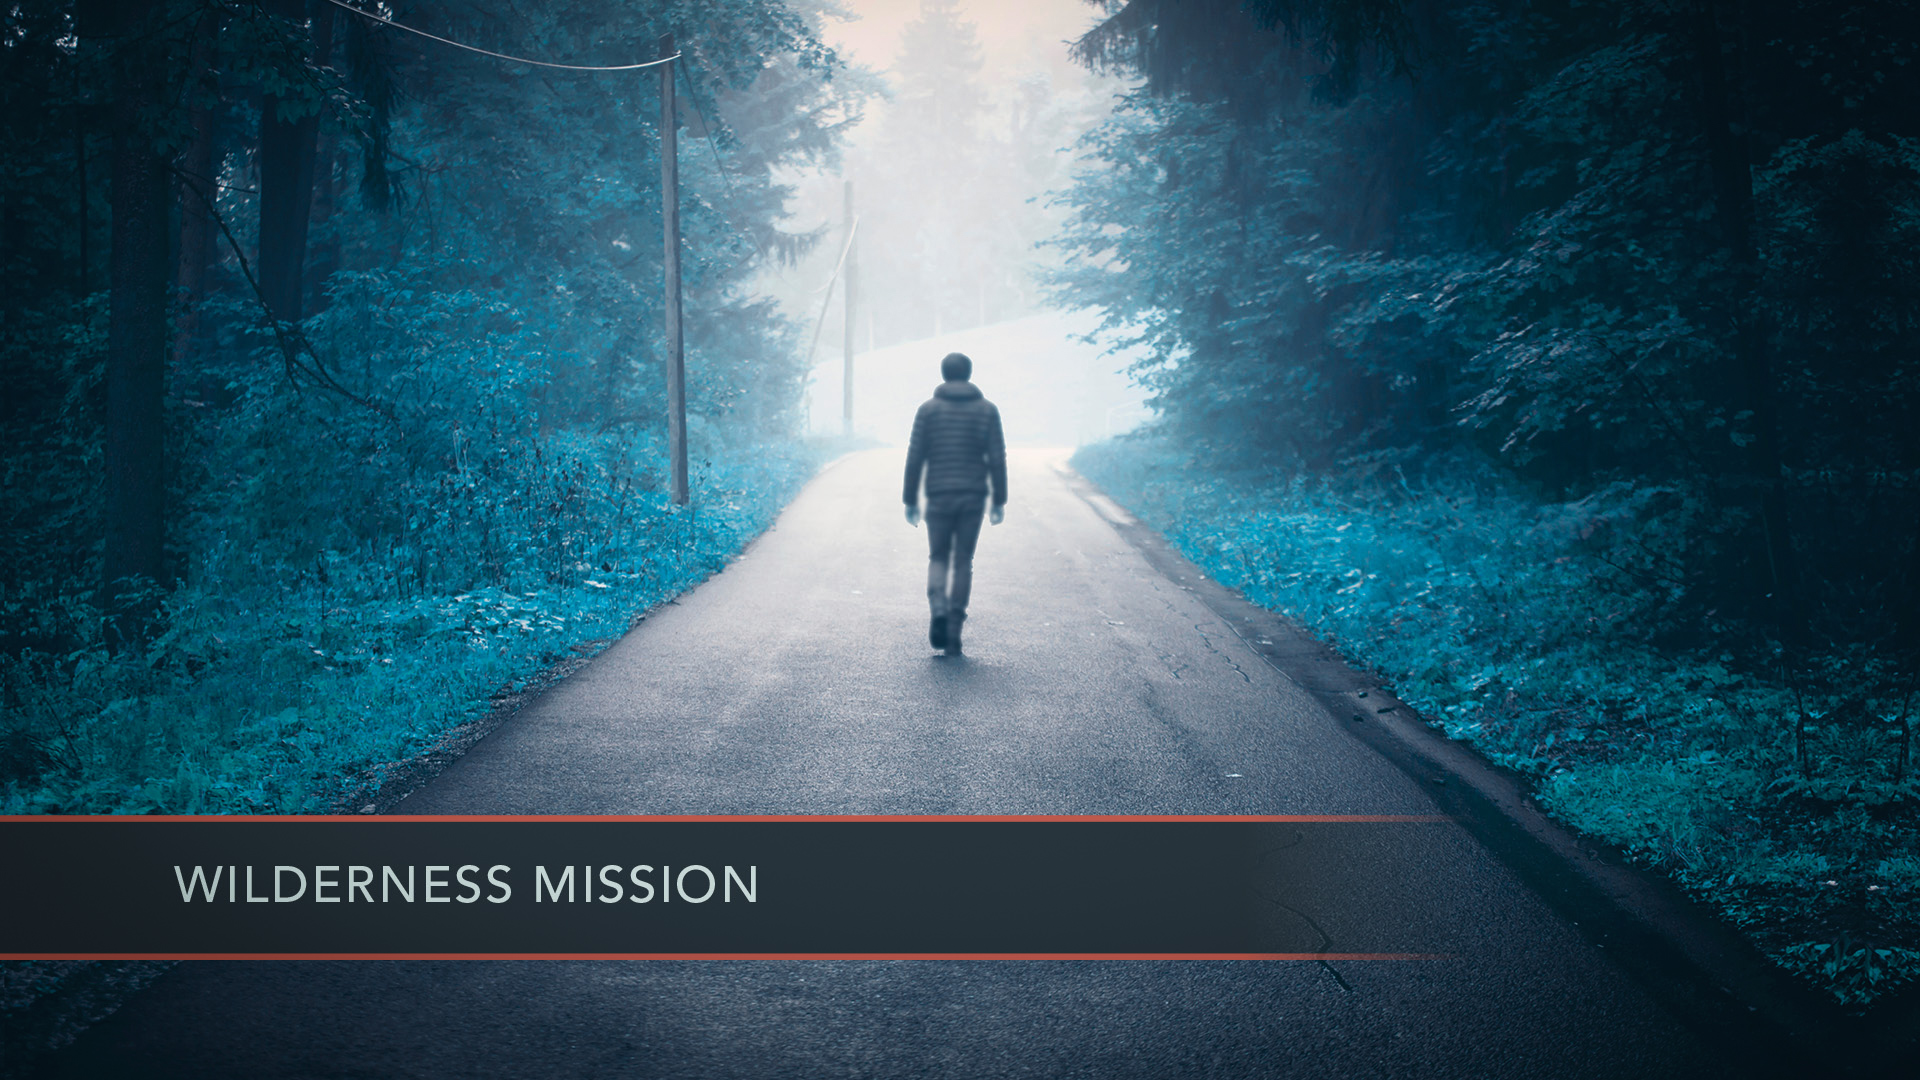 The Wilderness Mission